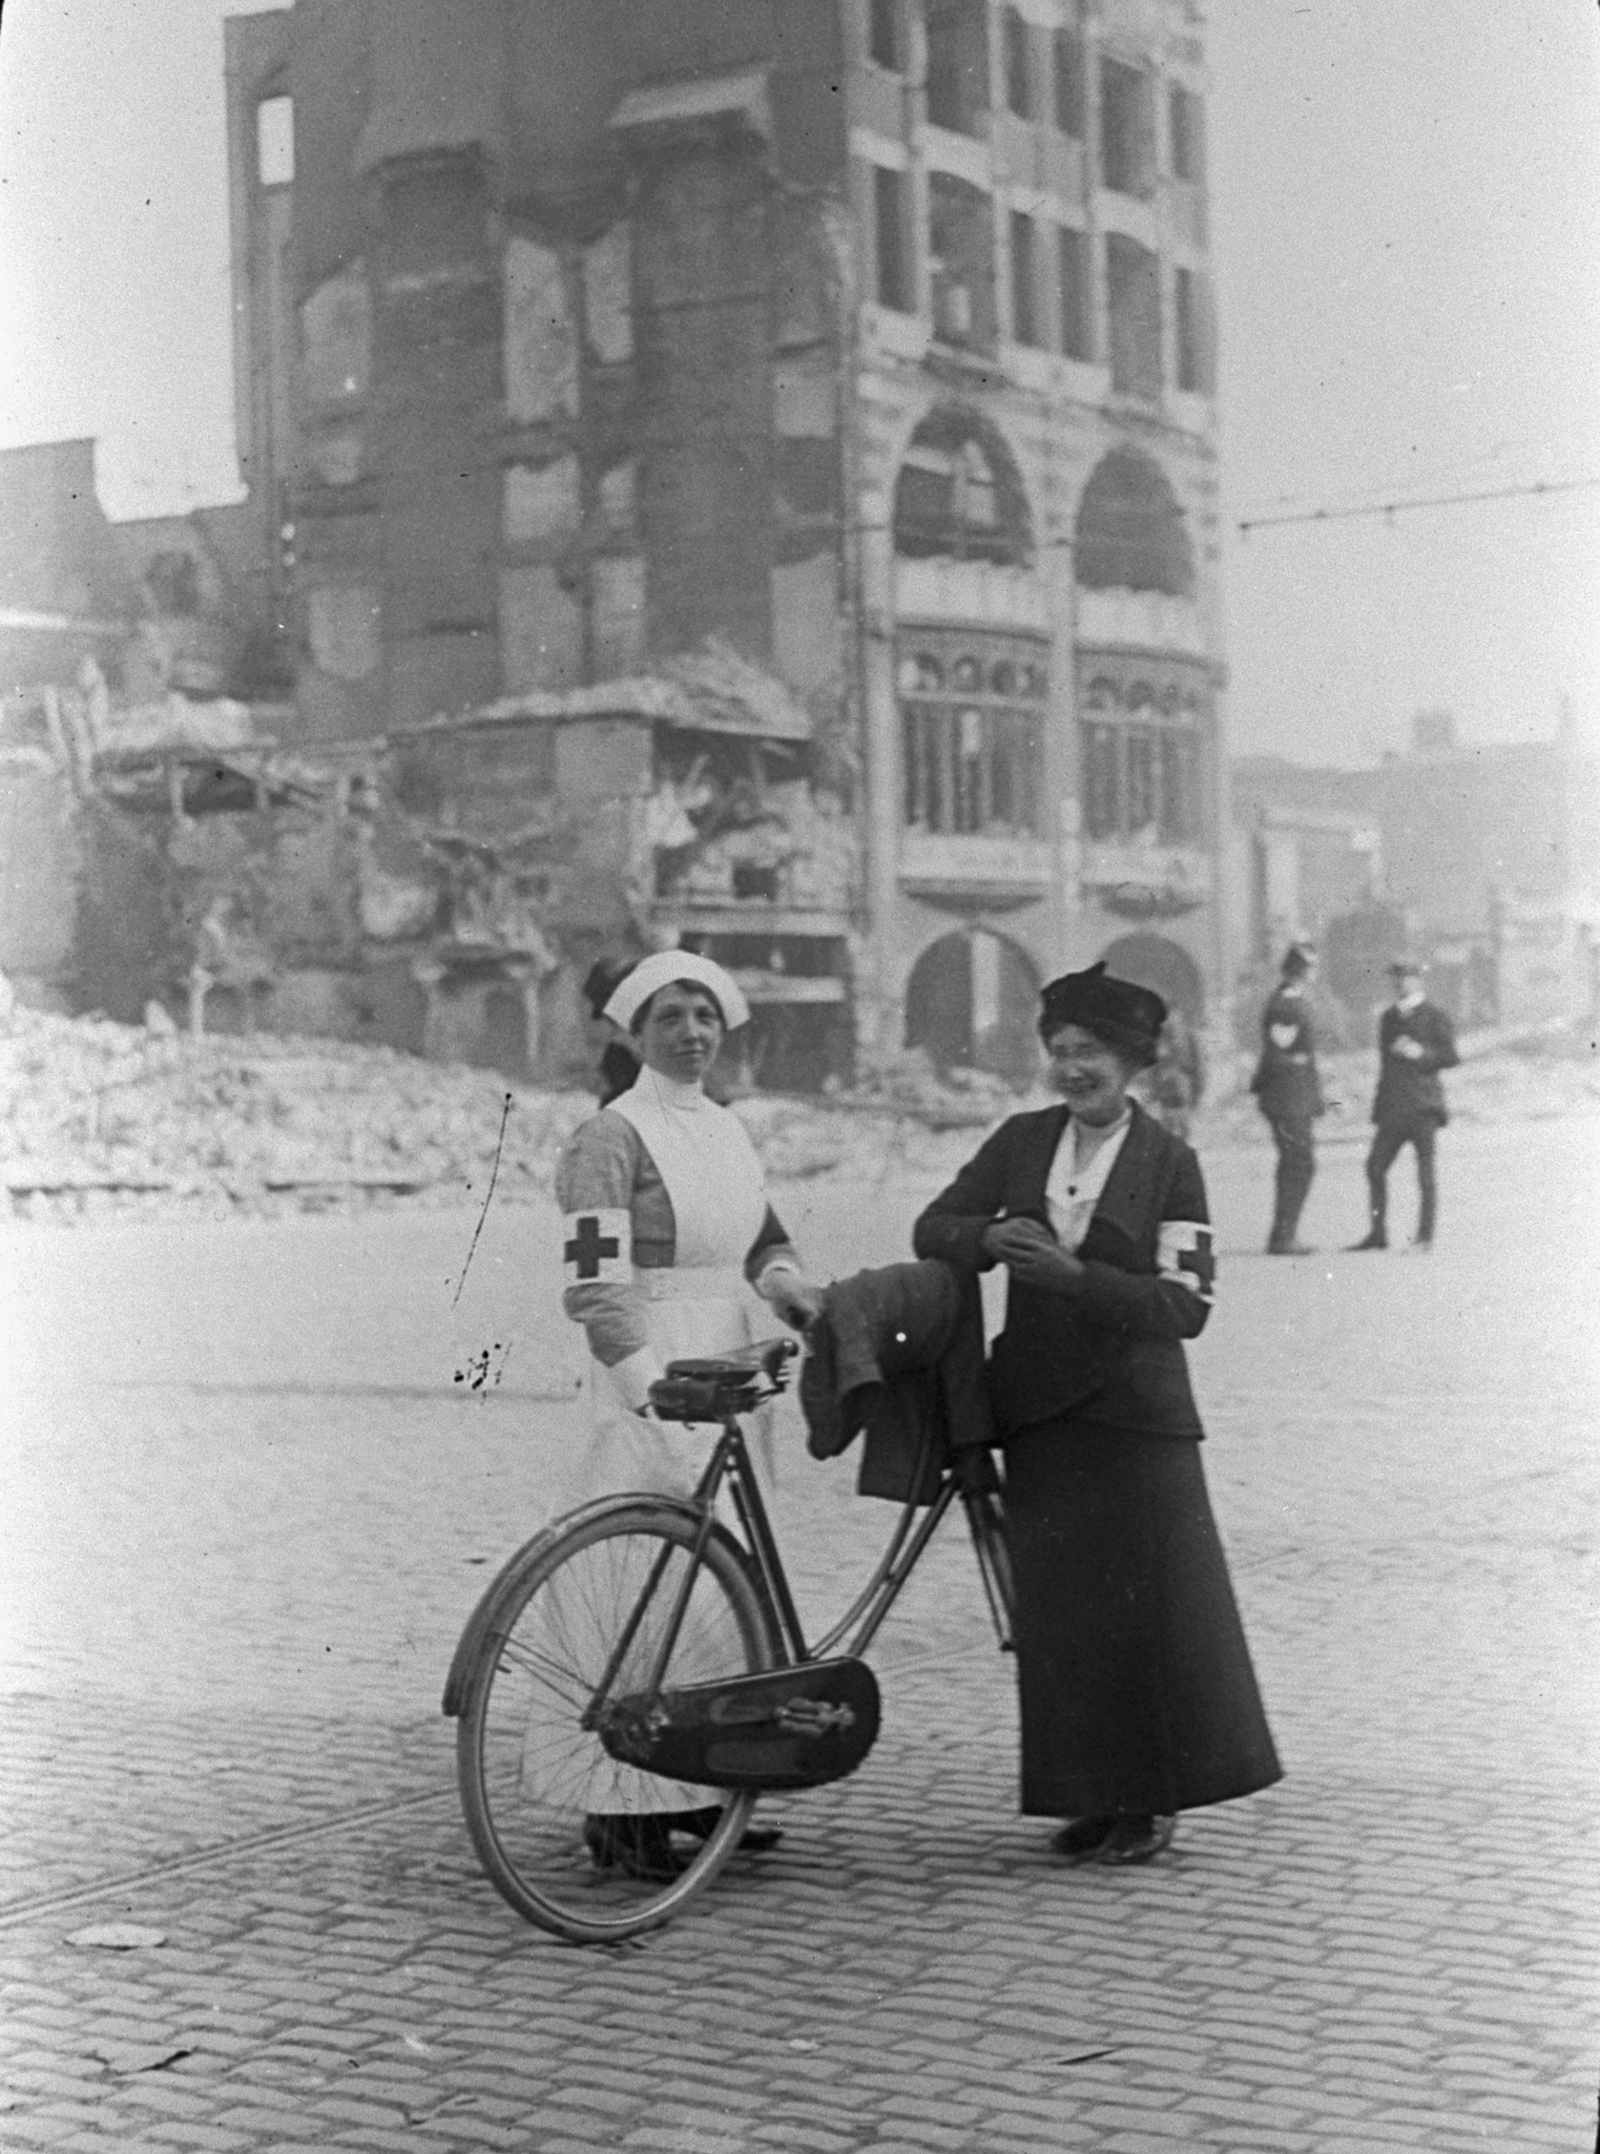 Nurses in front of a shelled building in Dublin after the Easter Rising of 1916